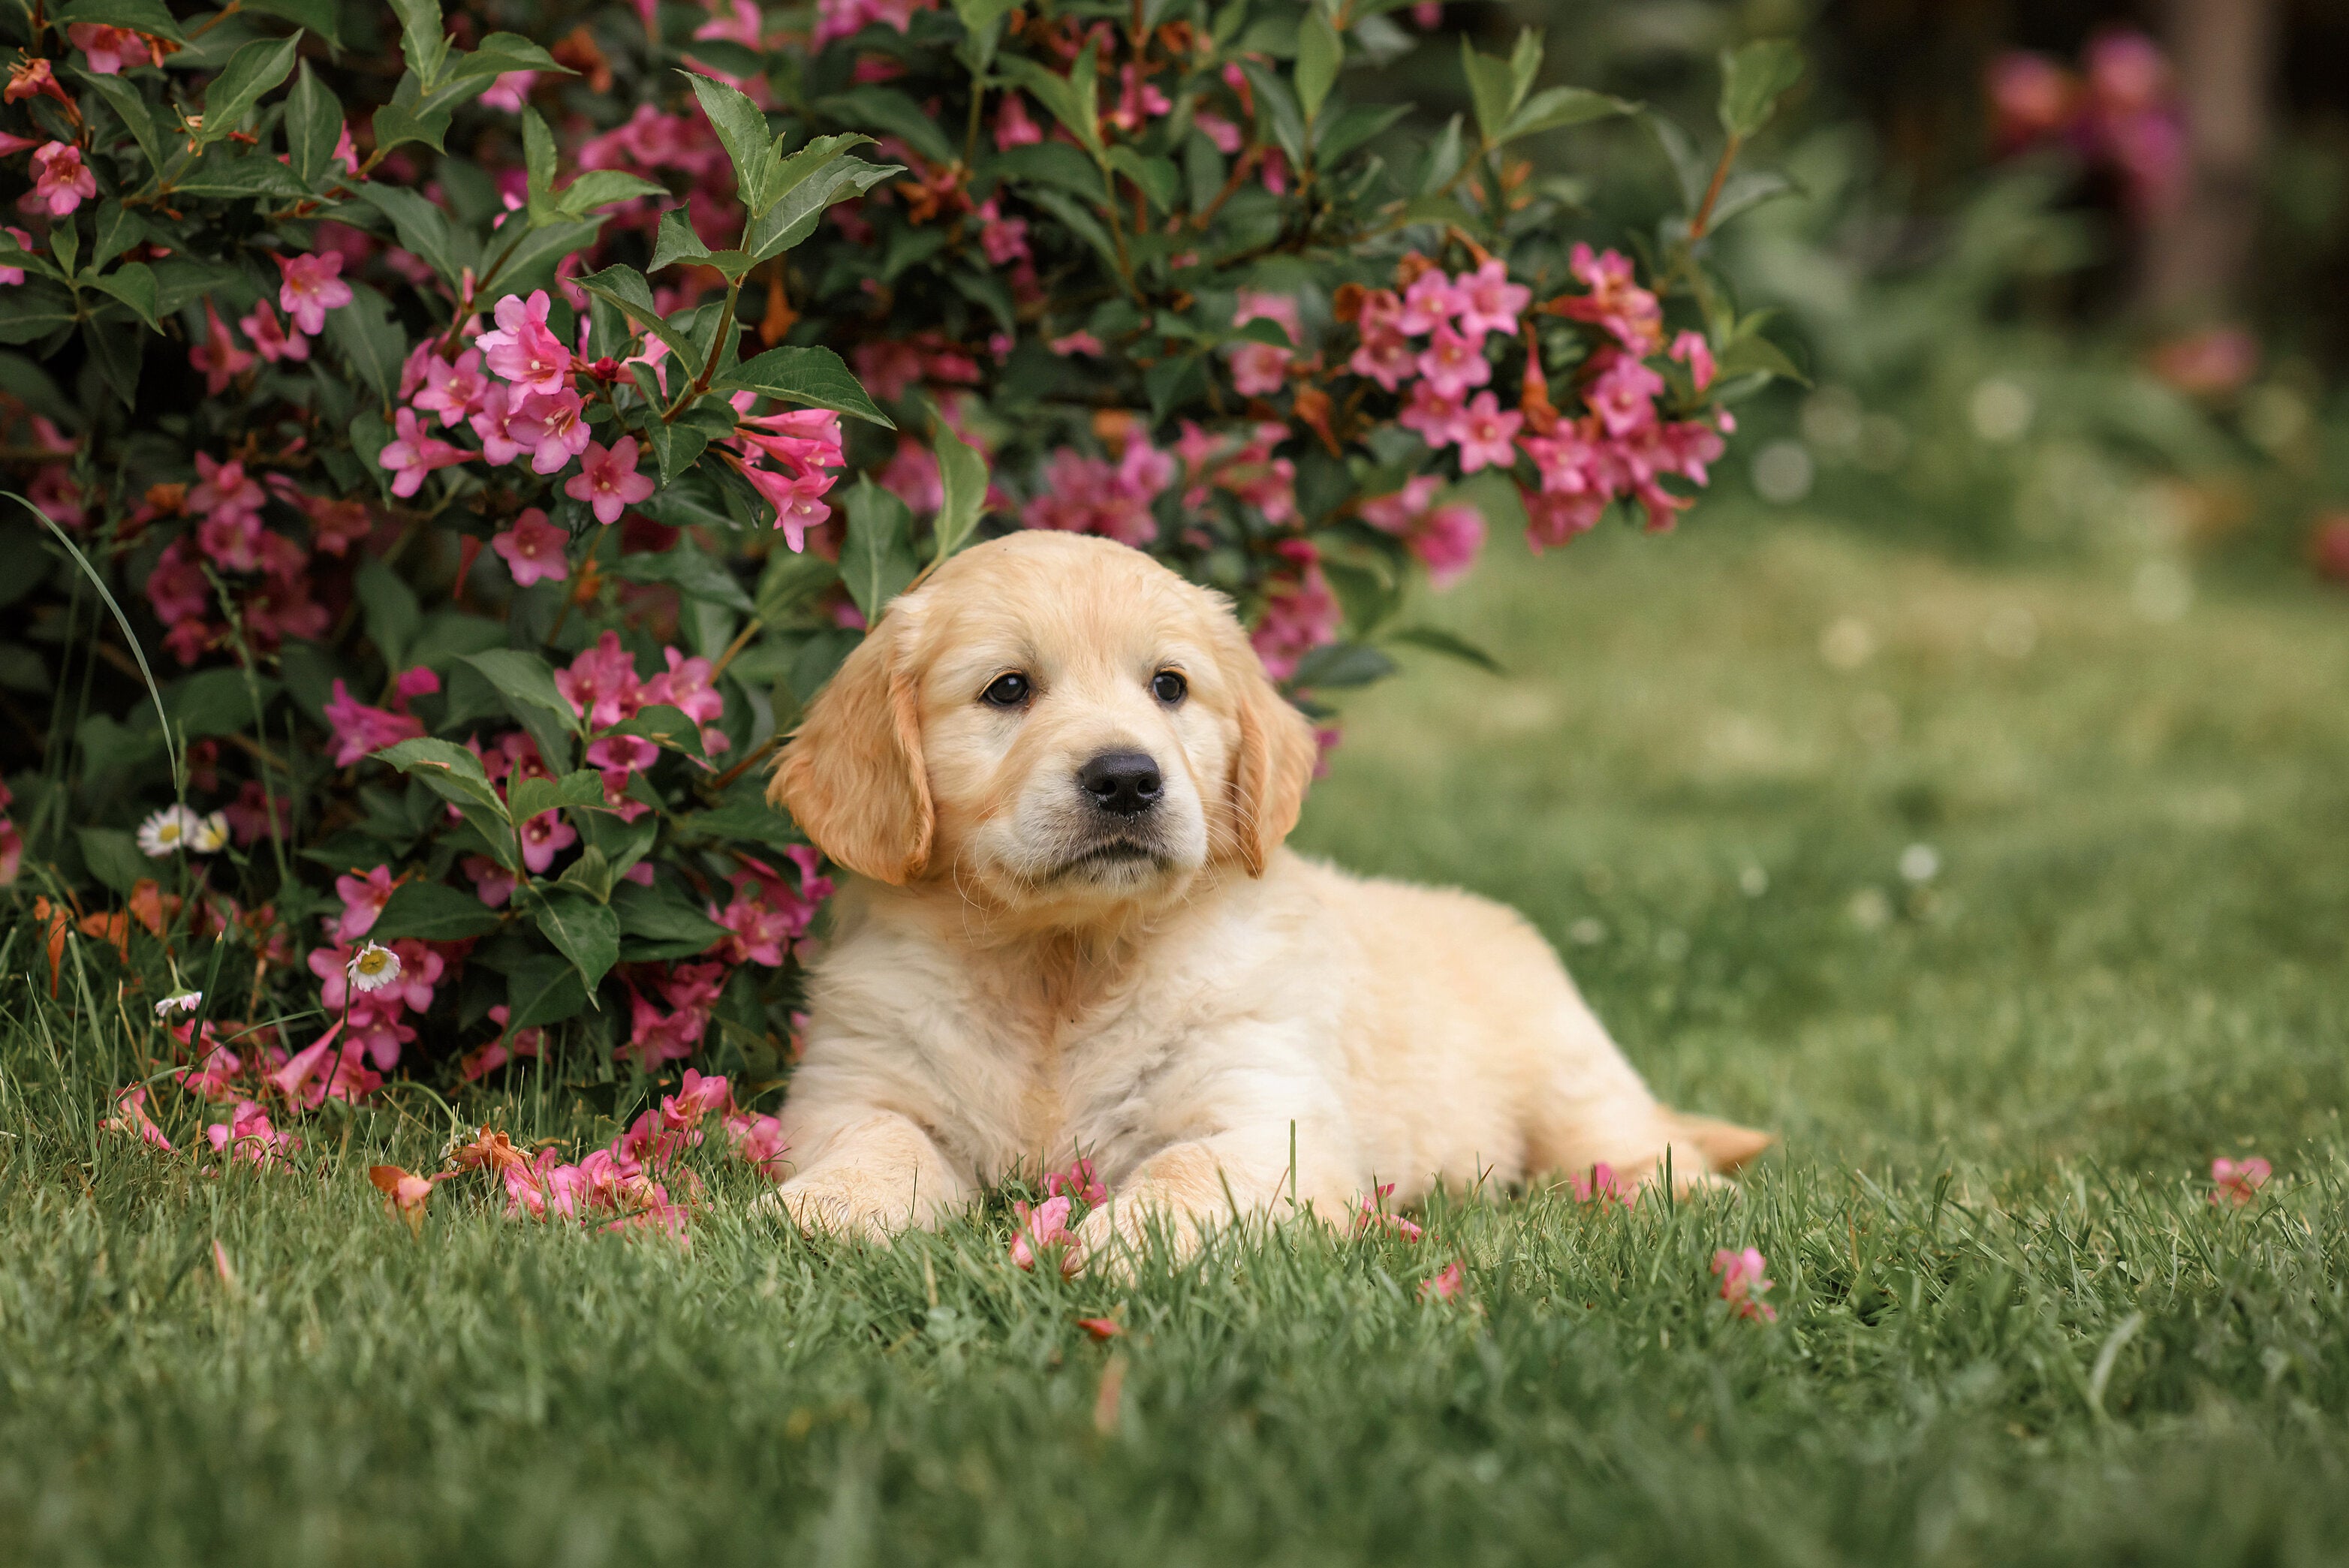 5 Top Tips for Making Your Garden Safe for Dogs